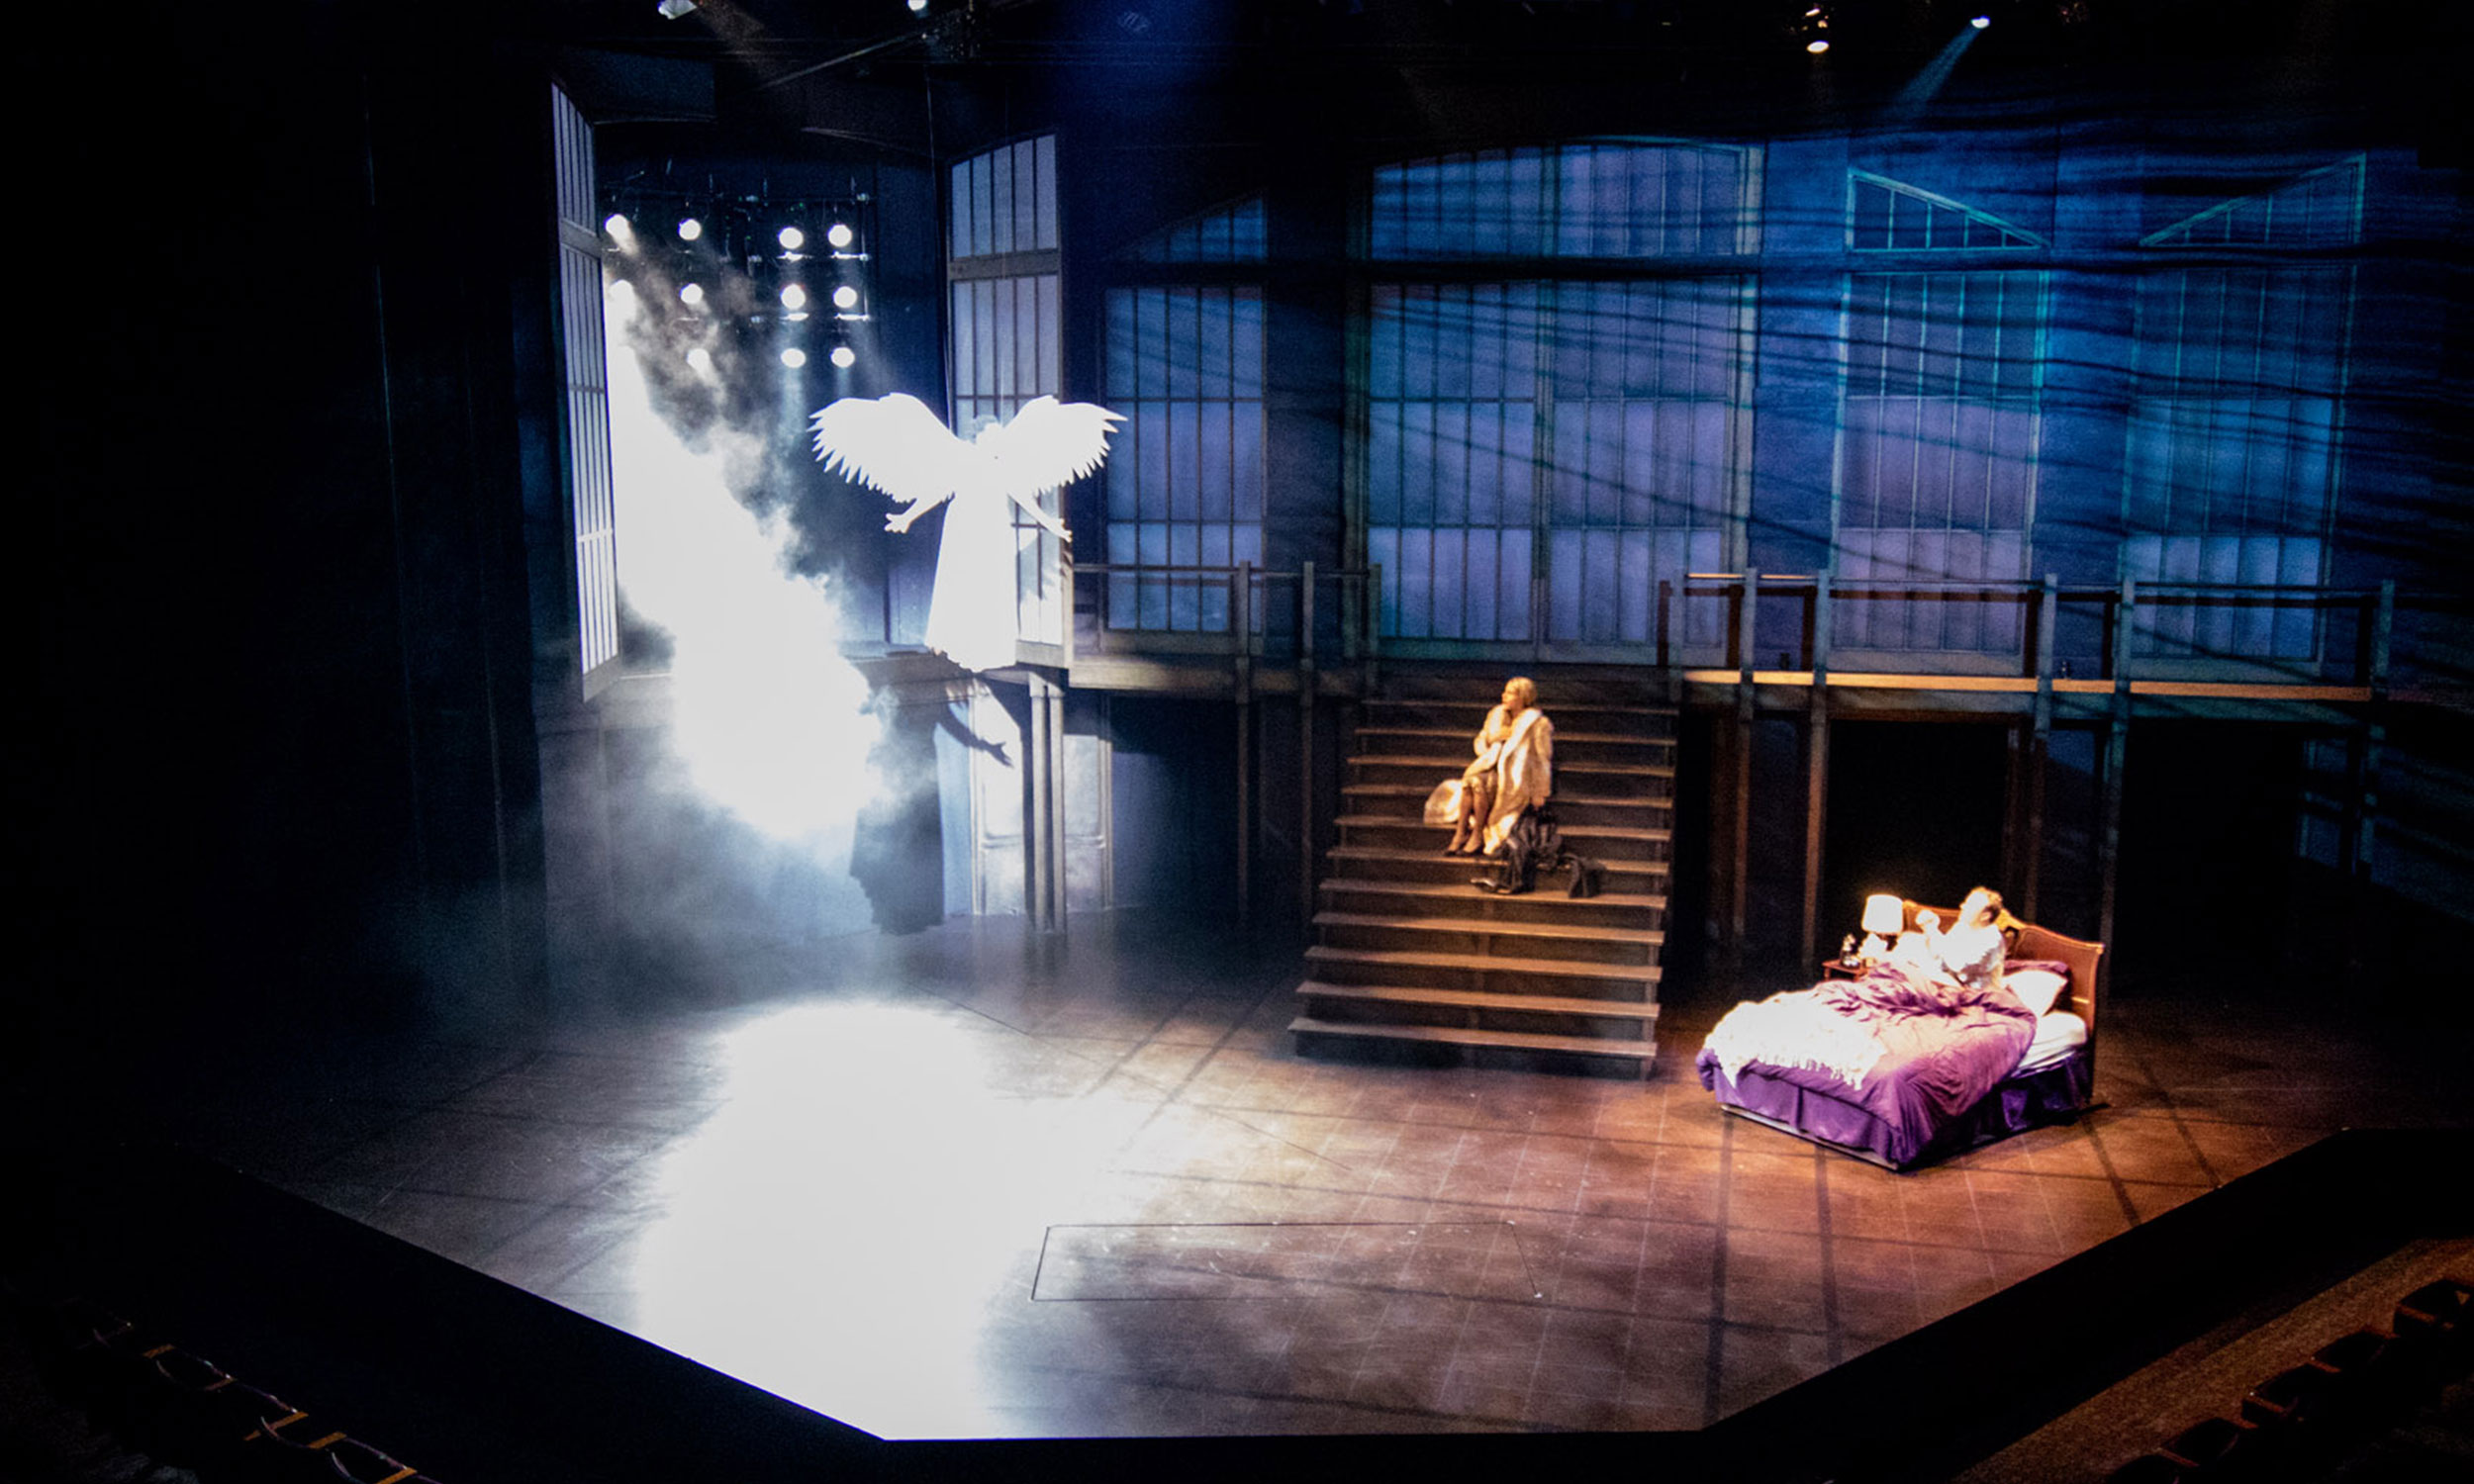   ANGELS IN AMERICA  2016 | Olney Theater — Olney, MD 